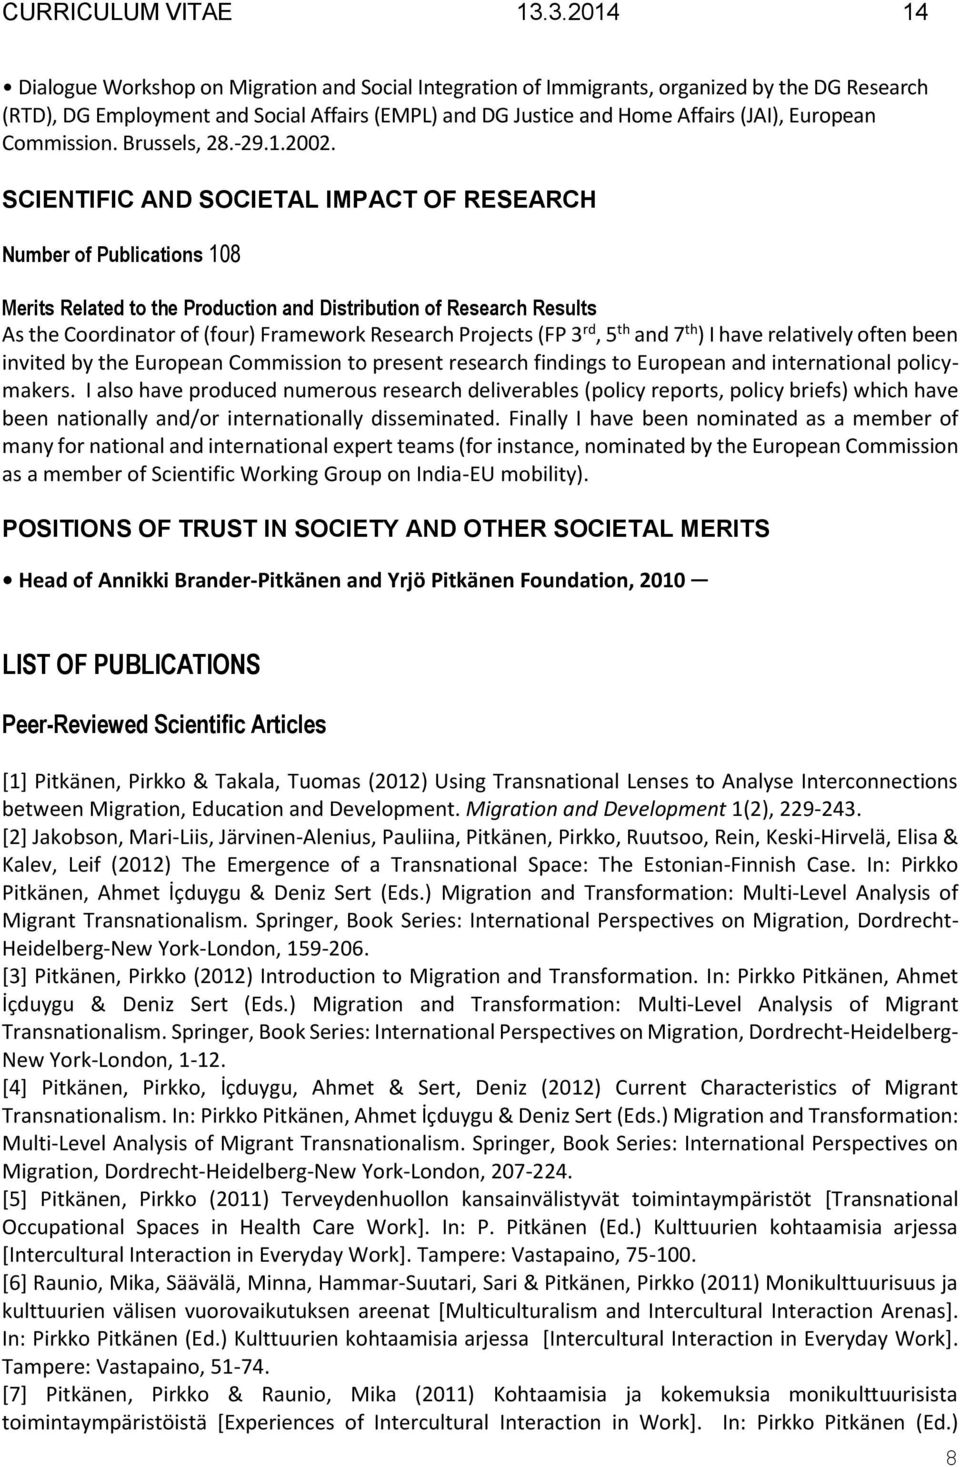 SCIENTIFIC AND SOCIETAL IMPACT OF RESEARCH Number of Publications 108 Merits Related to the Production and Distribution of Research Results As the Coordinator of (four) Framework Research Projects